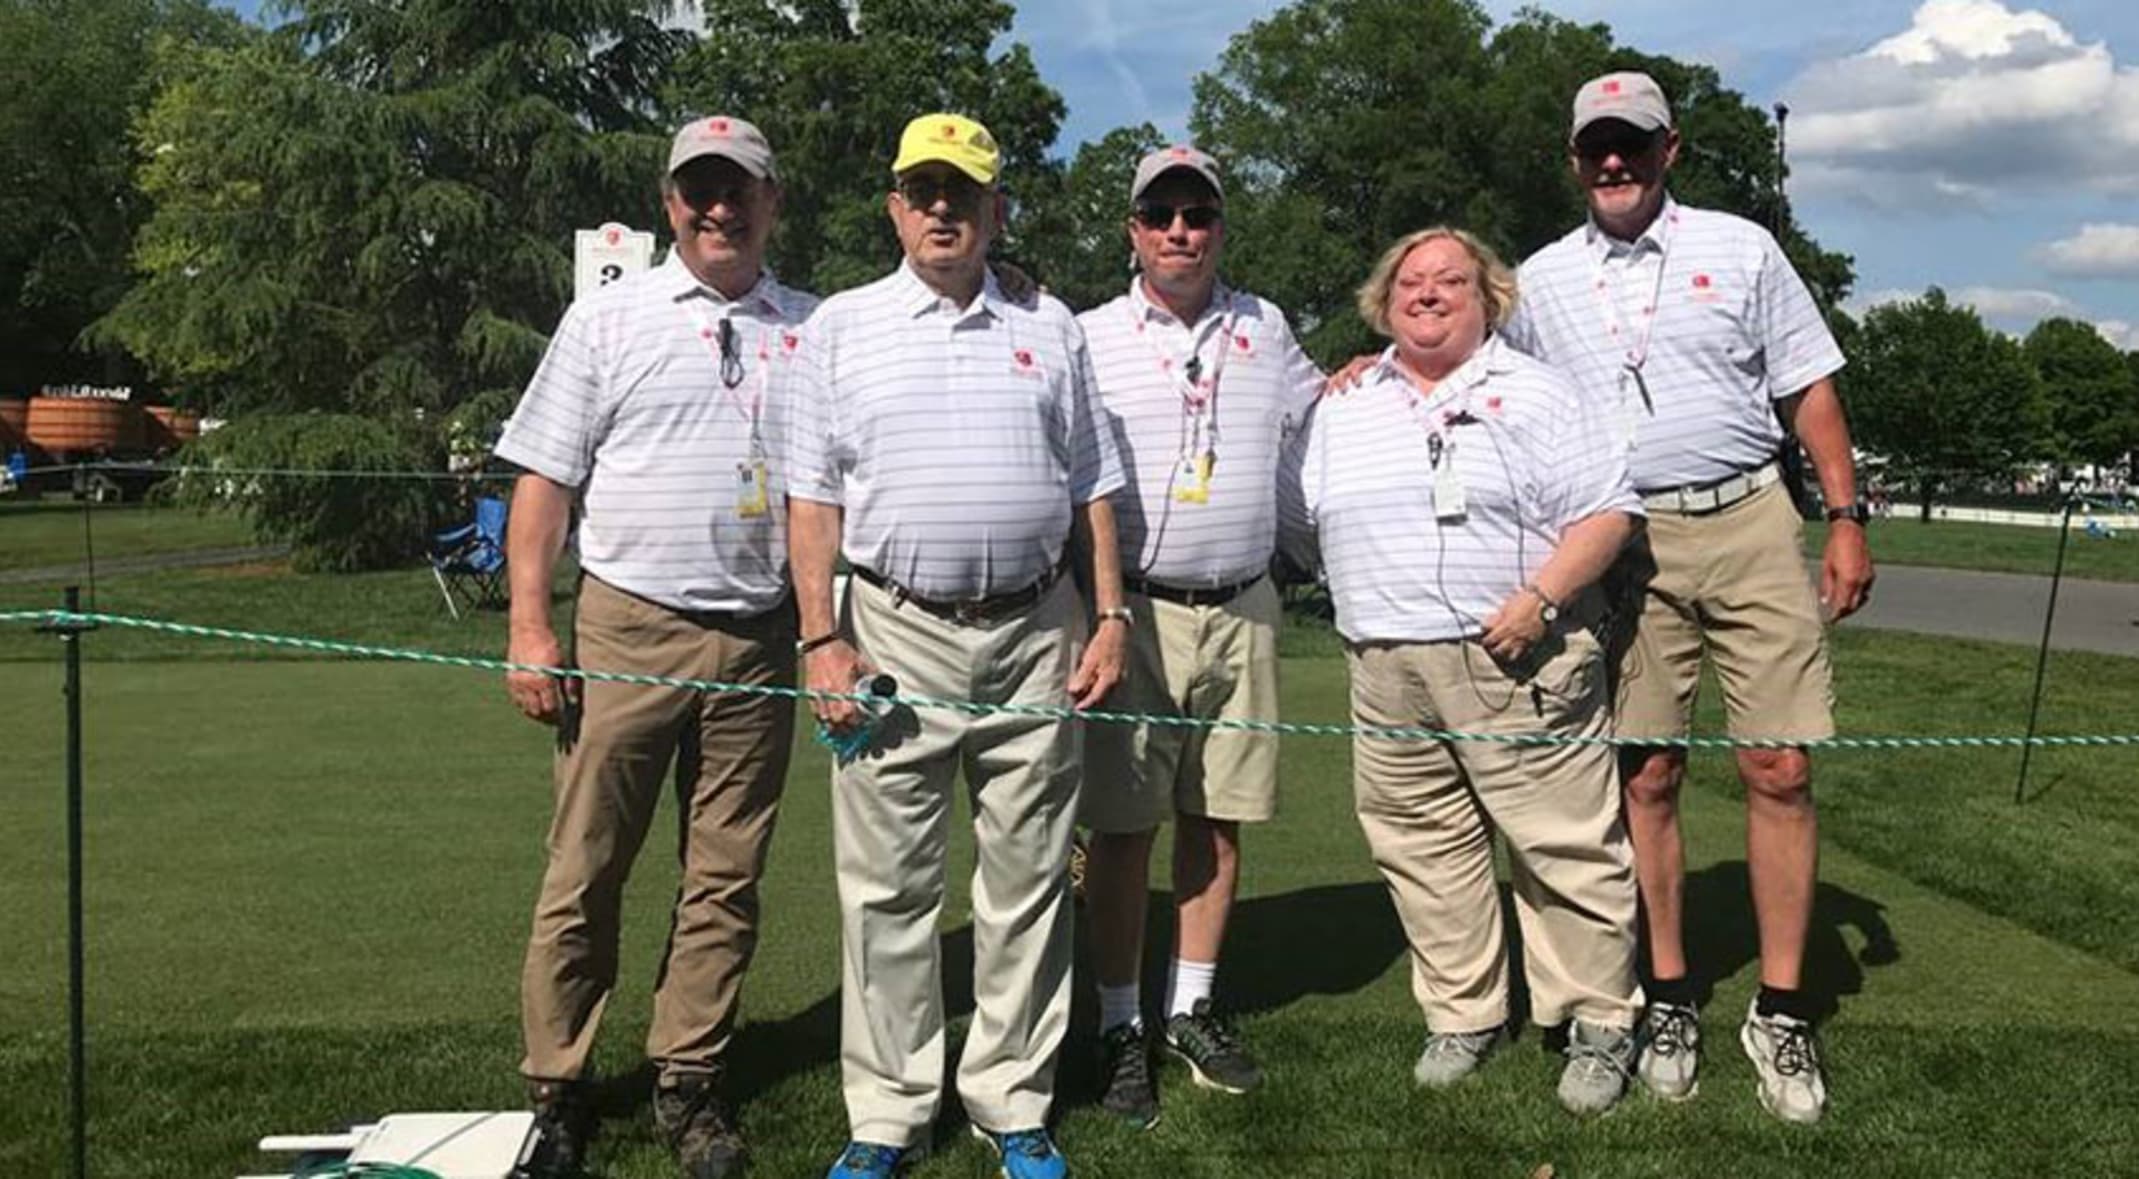 Wells Fargo Championship Volunteer Receives Special Honors For Inspiring Others On The Greens